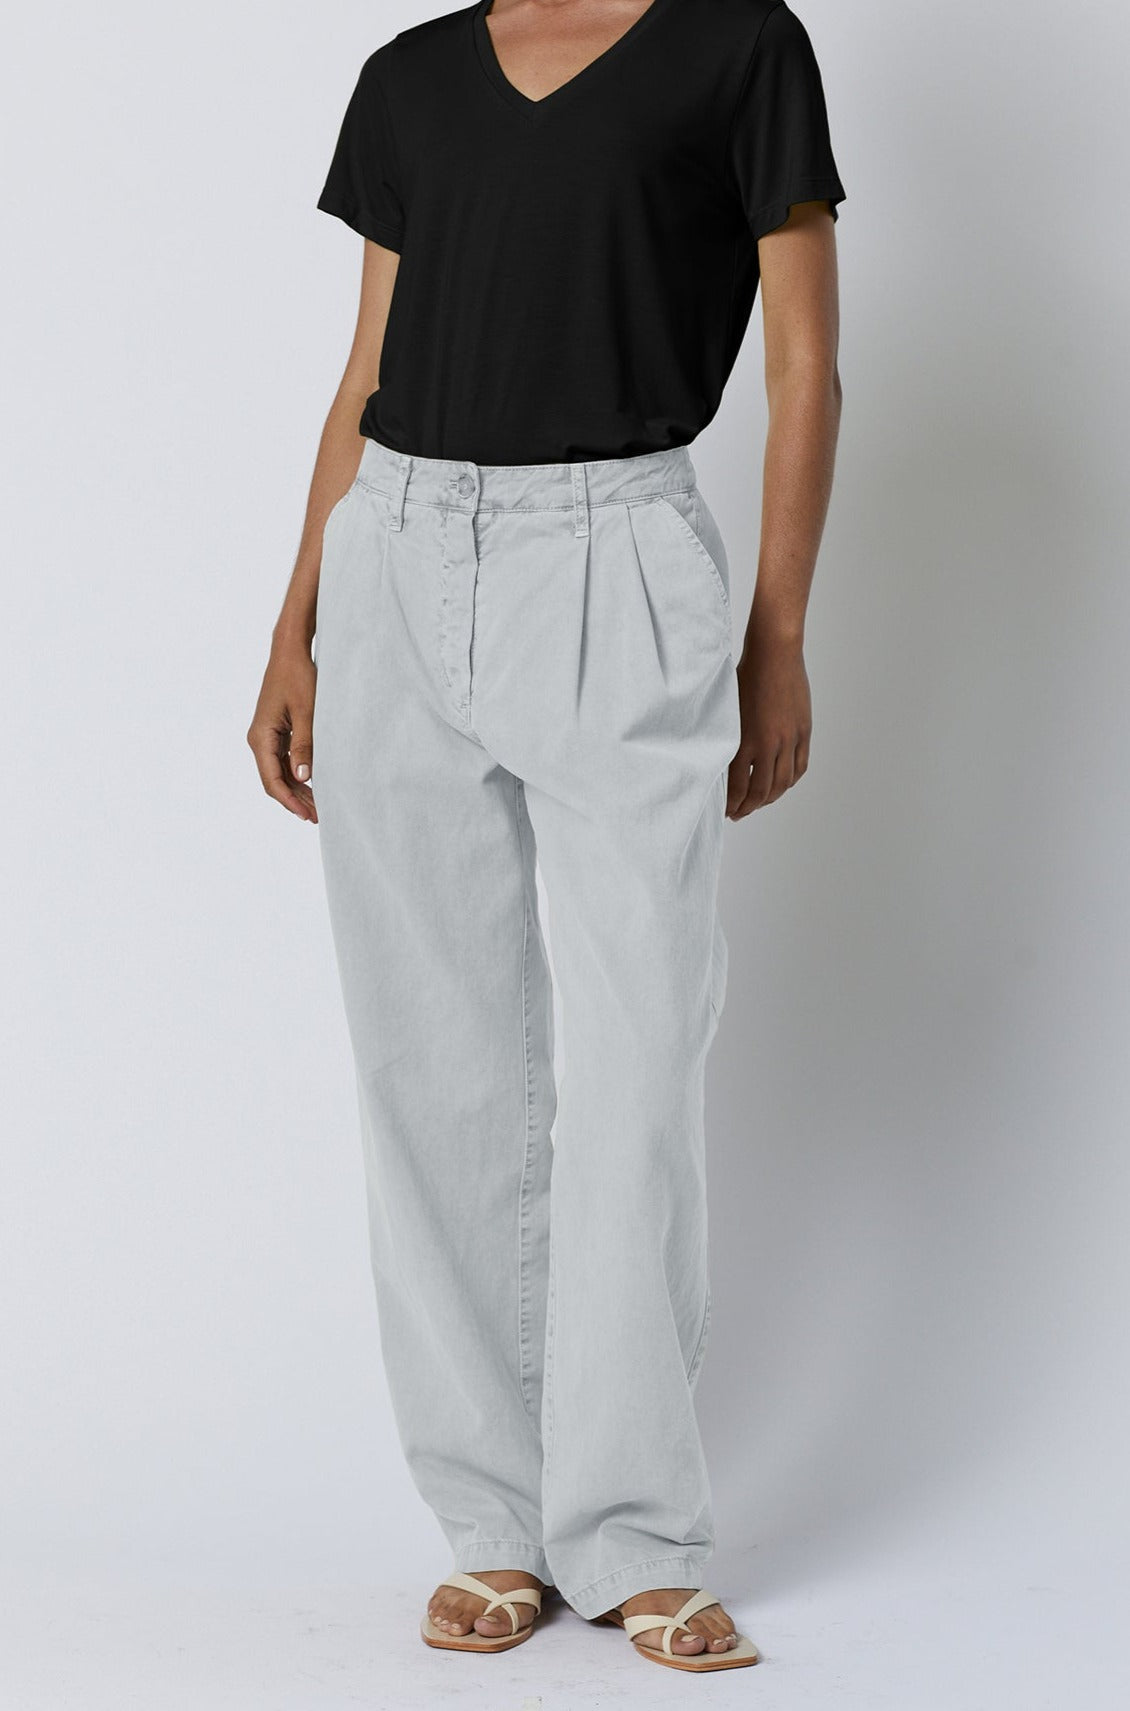   Temescal Pant in candle front 